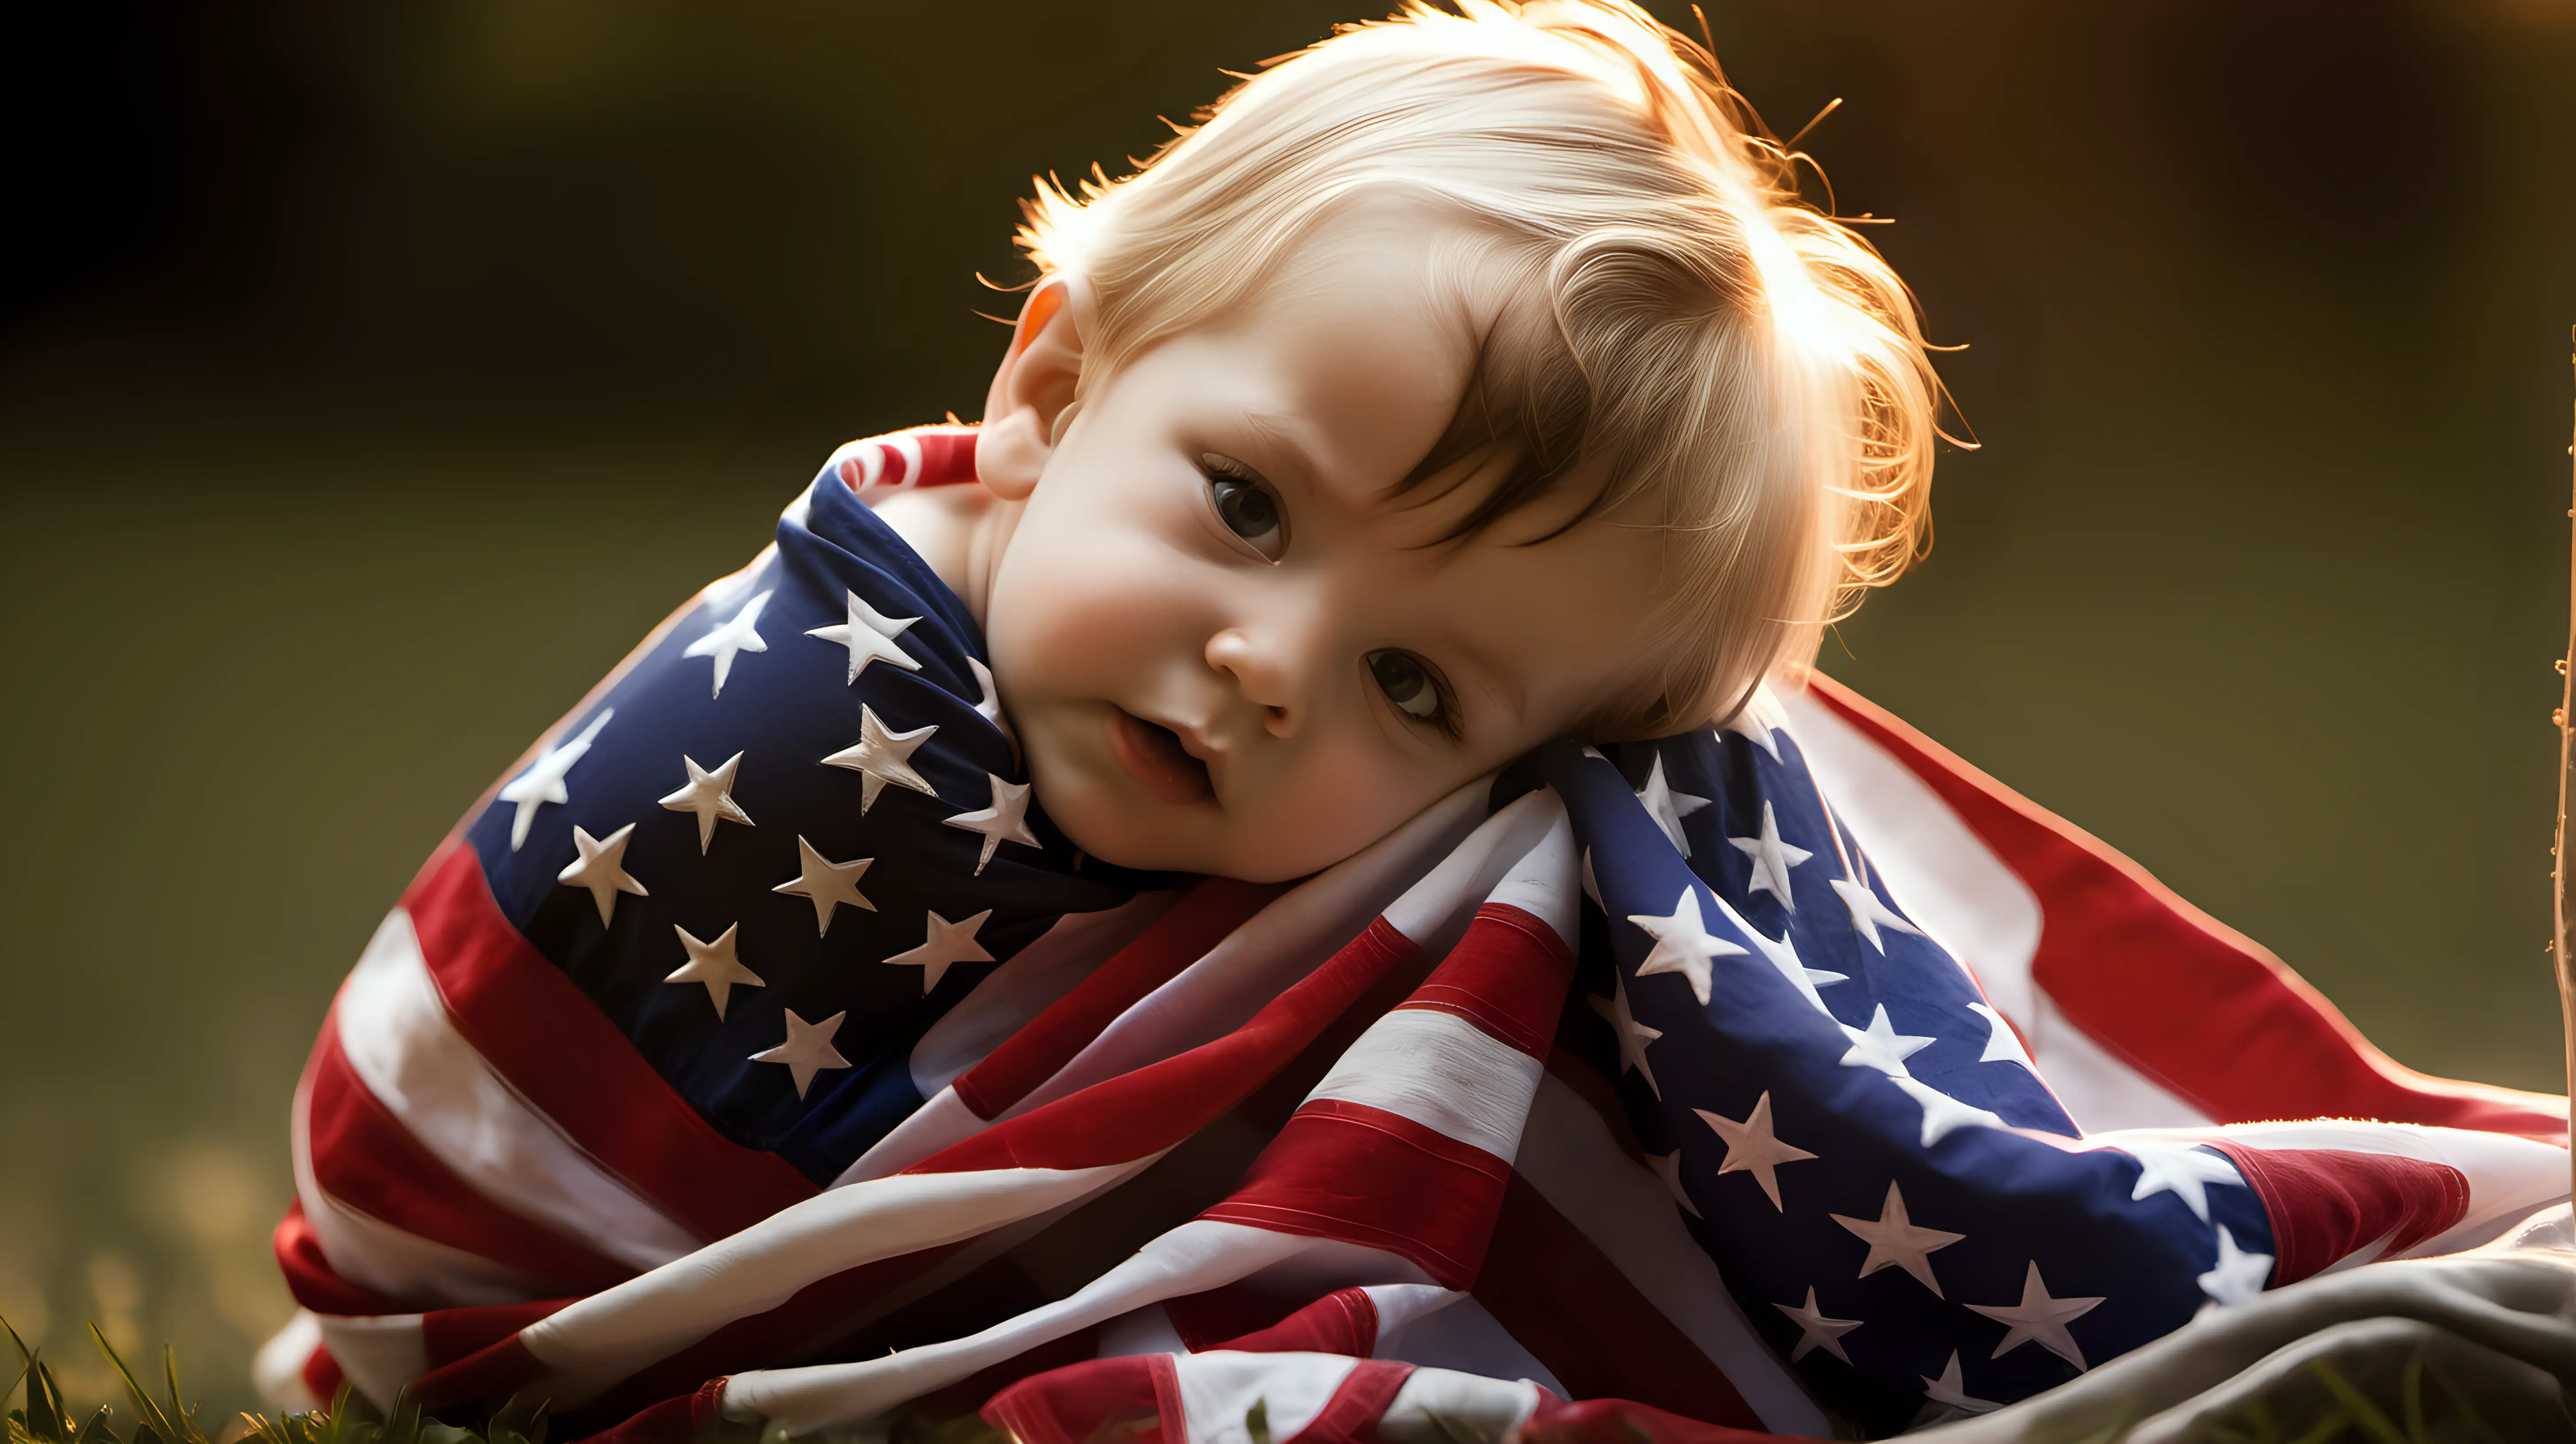 Child Kissing American Flag with Patriotism and Affection